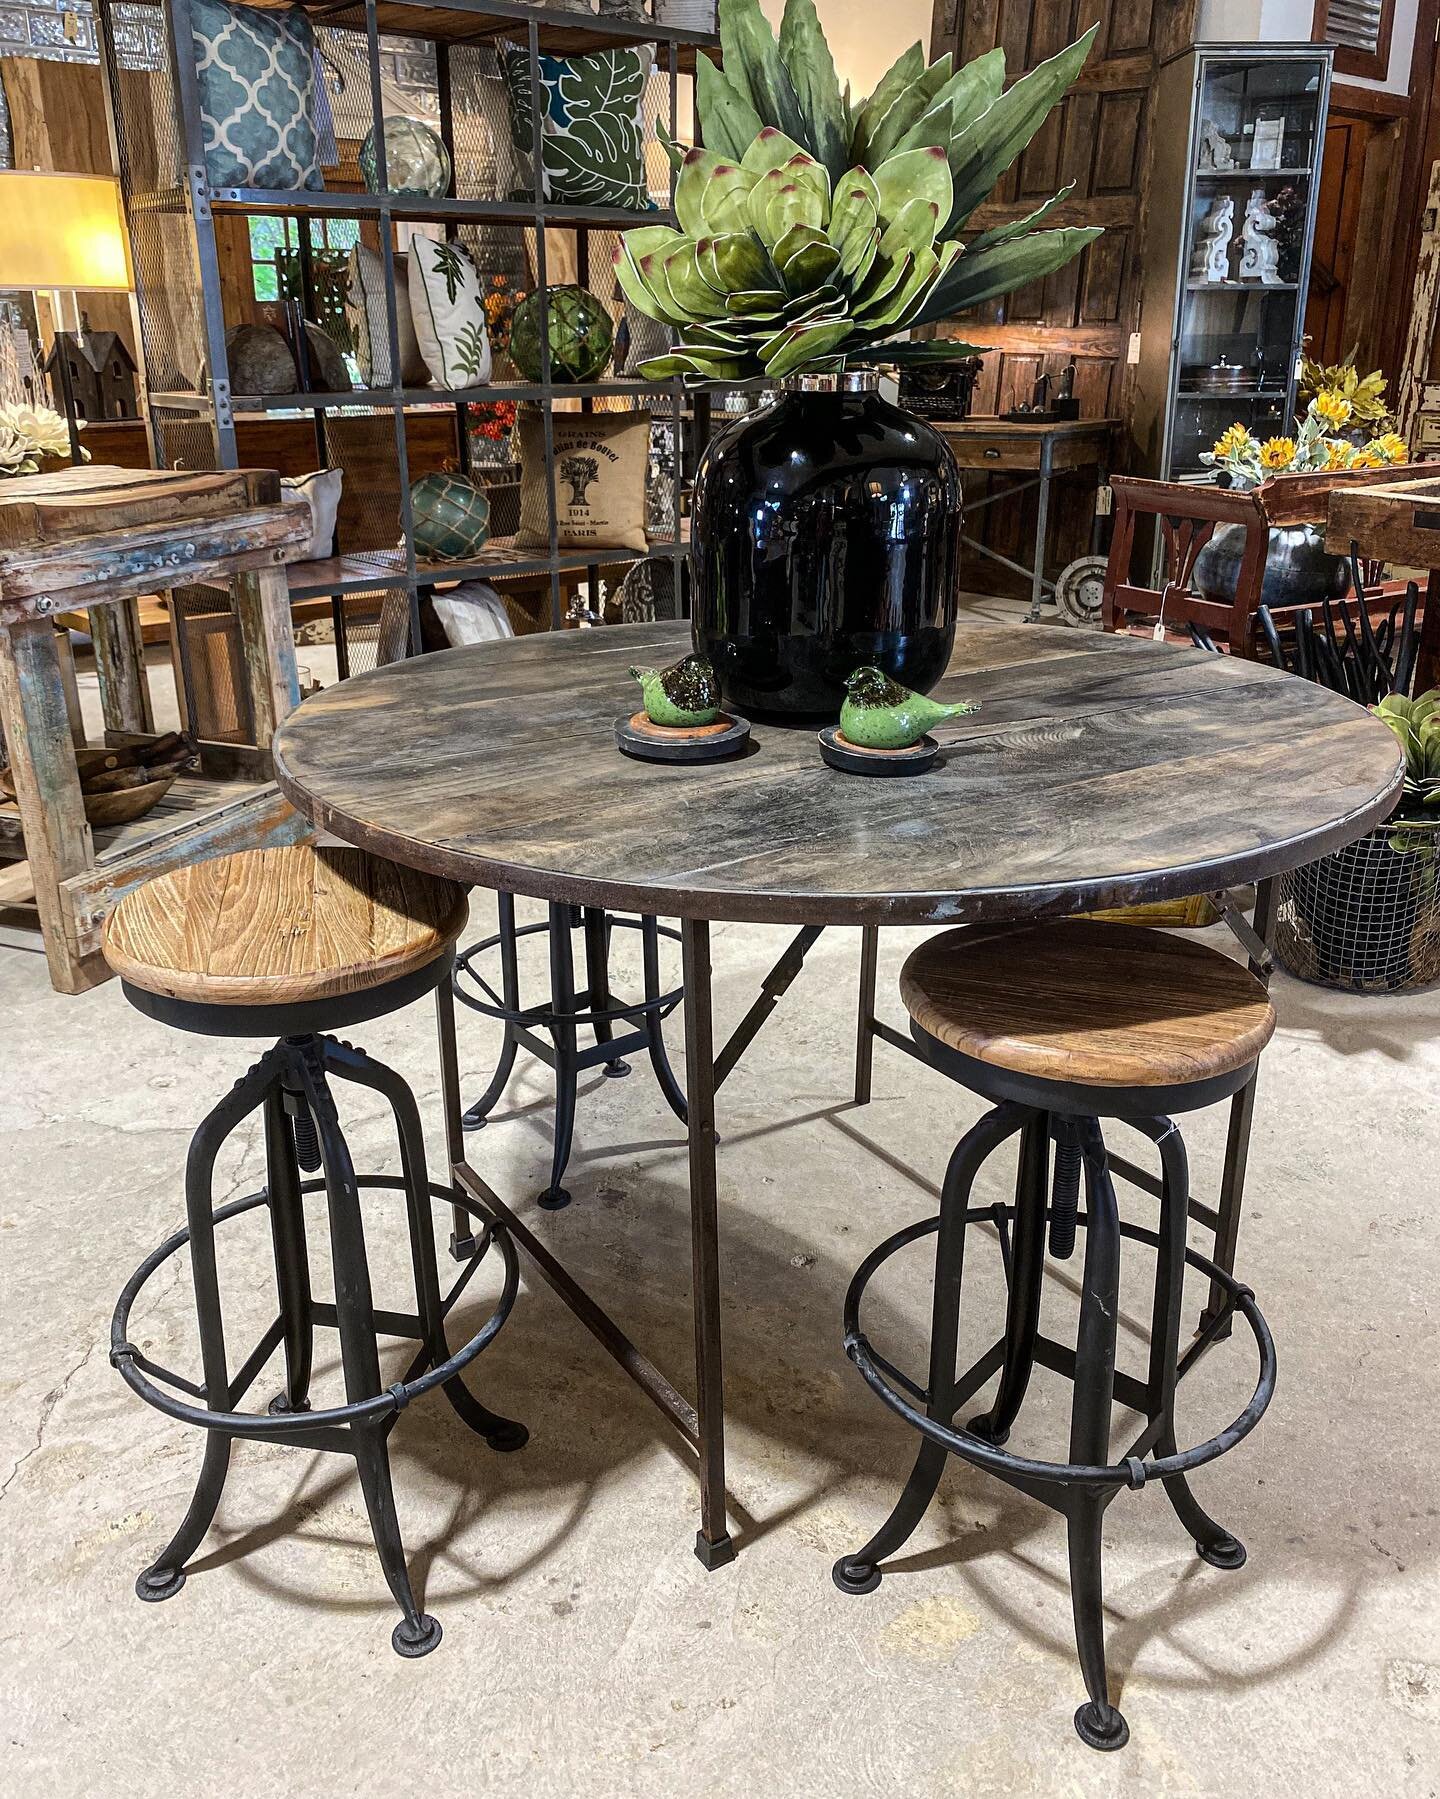 This table has fold up legs, and measures approximately 48&rdquo; in diameter. 

We&rsquo;re open Mon-Fri 10-5, Sat 10-6, Sun 12-3. We are located at 1499 S. Main St., next to the Dog &amp; Pony Grill.

#boerne #boernetexas #boernetx #boerneshopping 